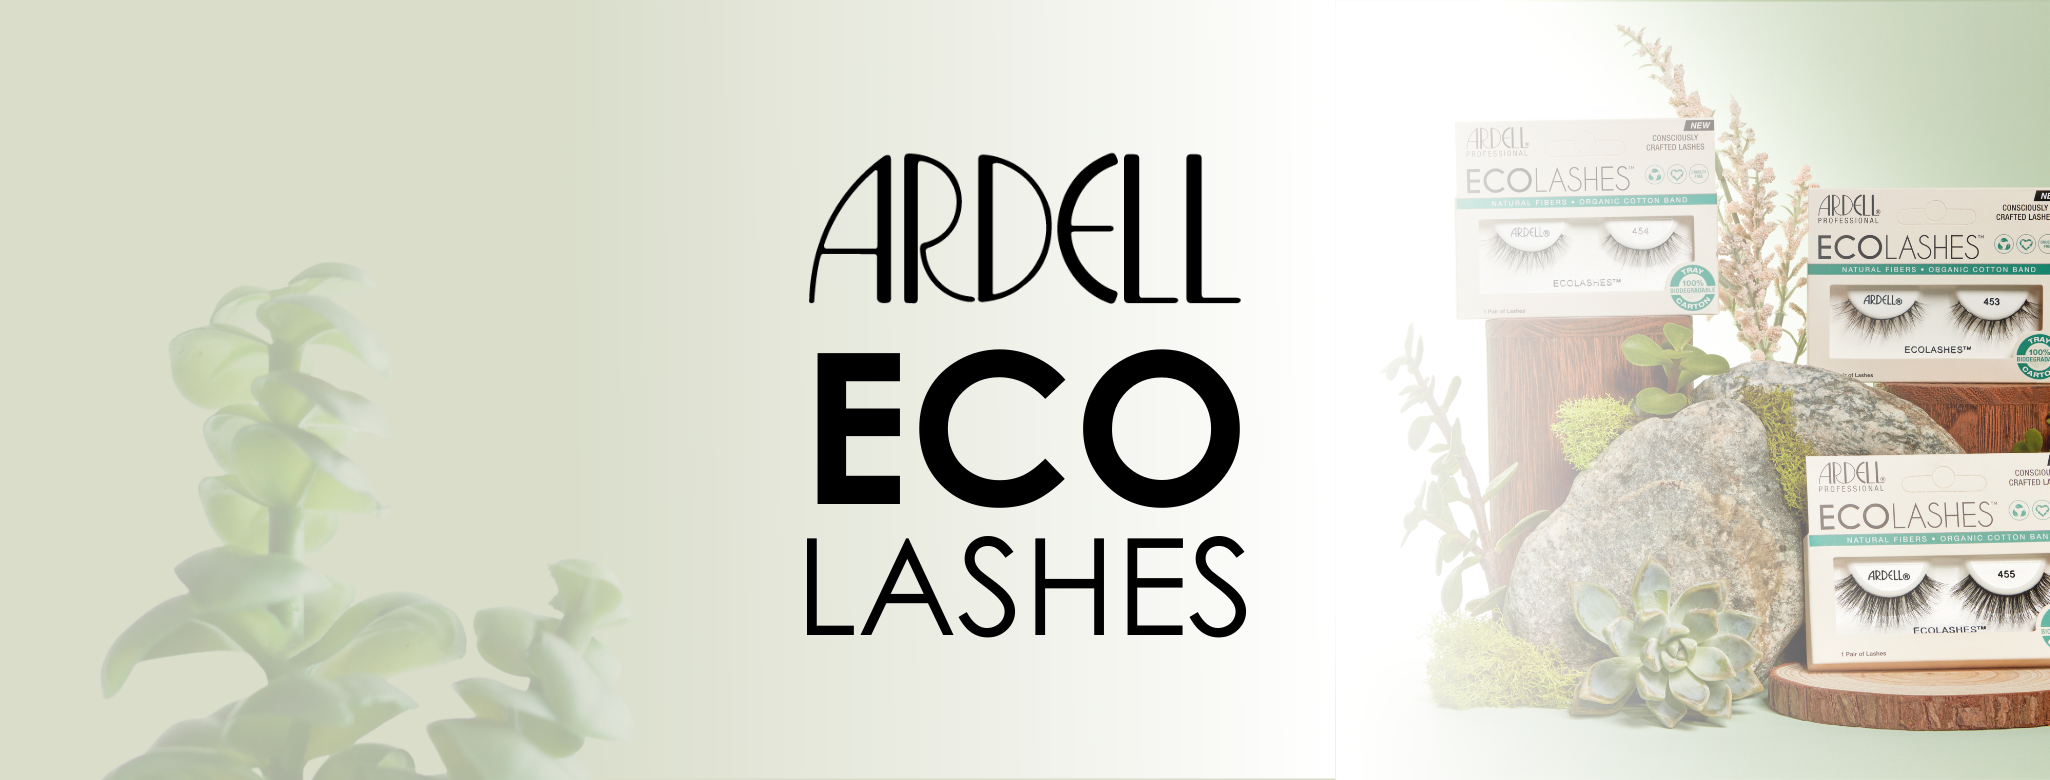 Introducing Ardell ECO Lashes!